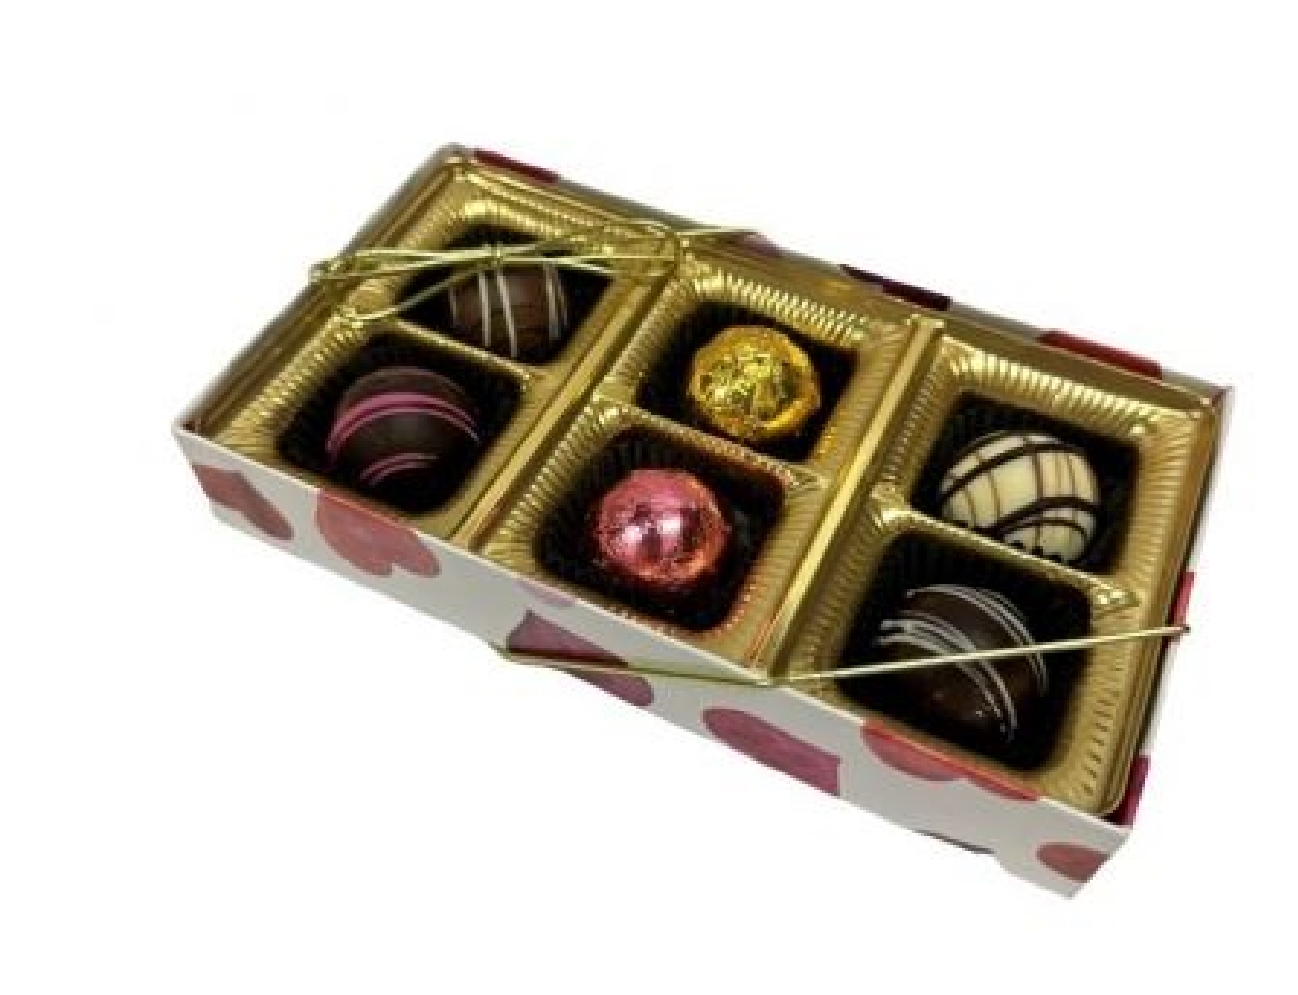 anDea Chocolate
Painted Hearts Chocolate Gift ...